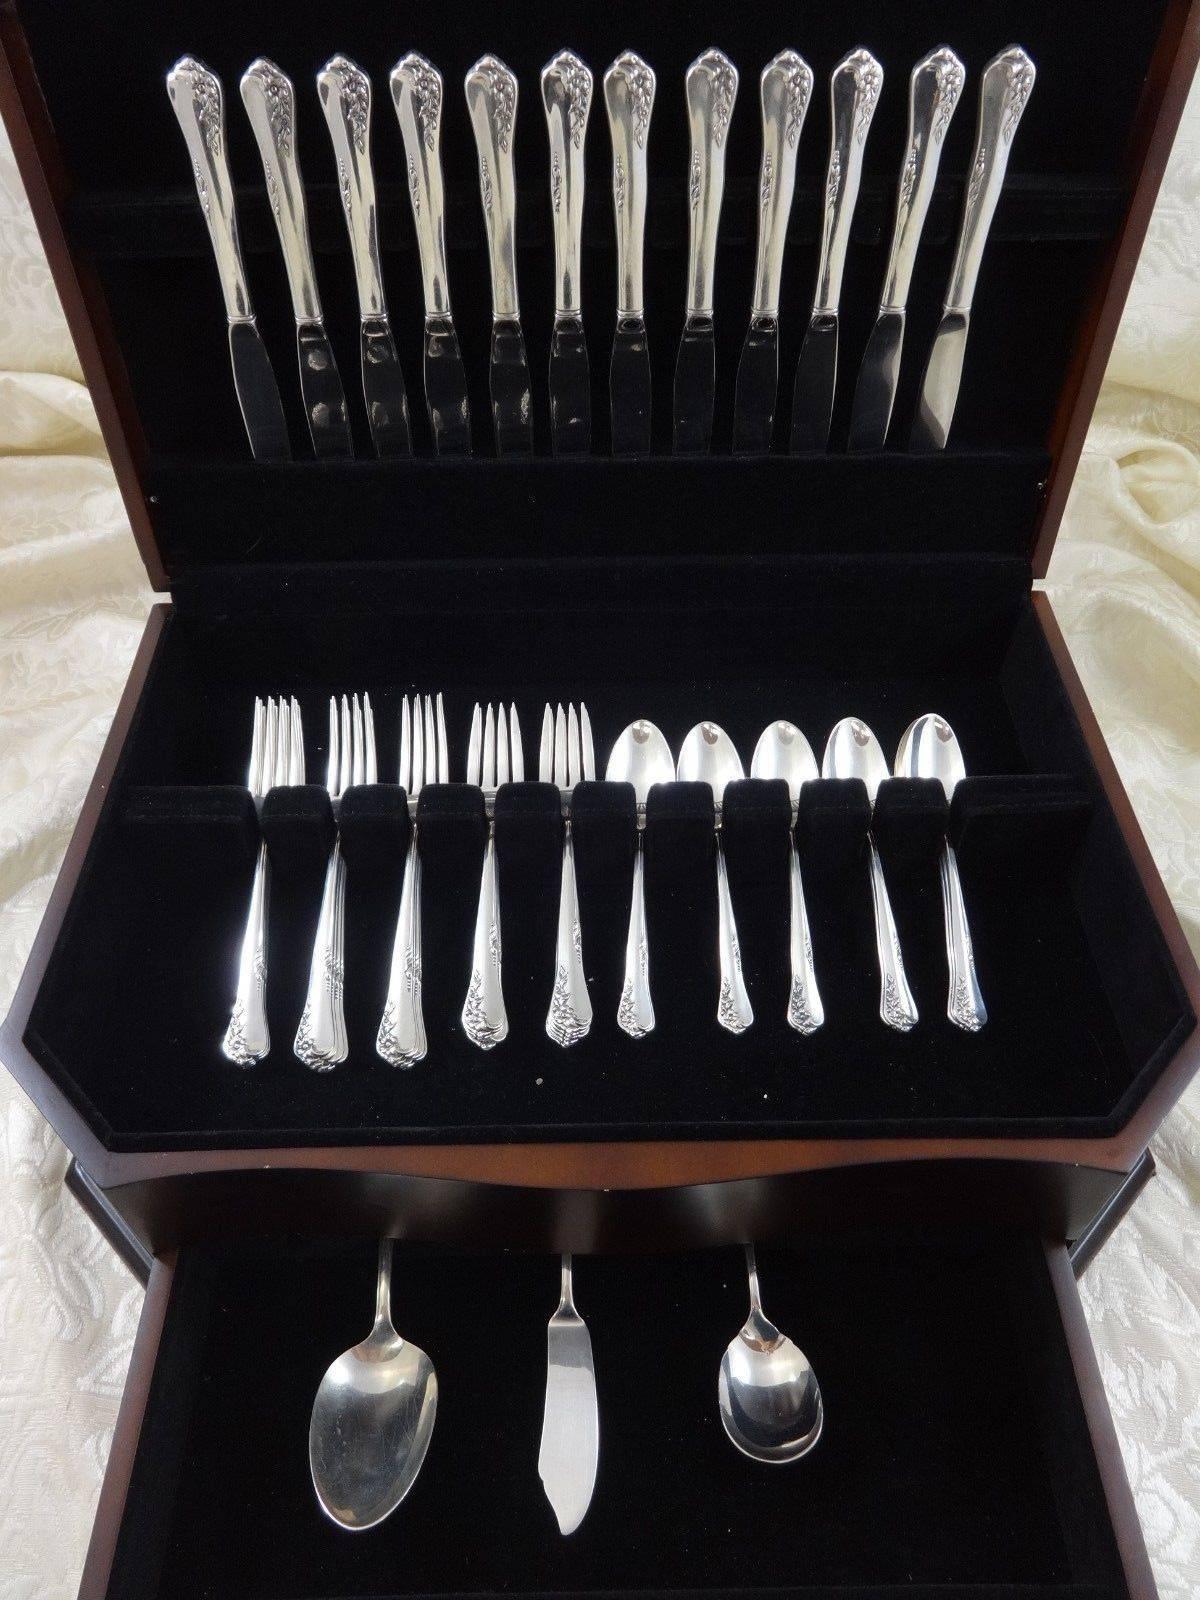 Lovely engagement by Oneida sterling silver flatware set, 51 pieces. This set includes:

12 knives, 8 7/8